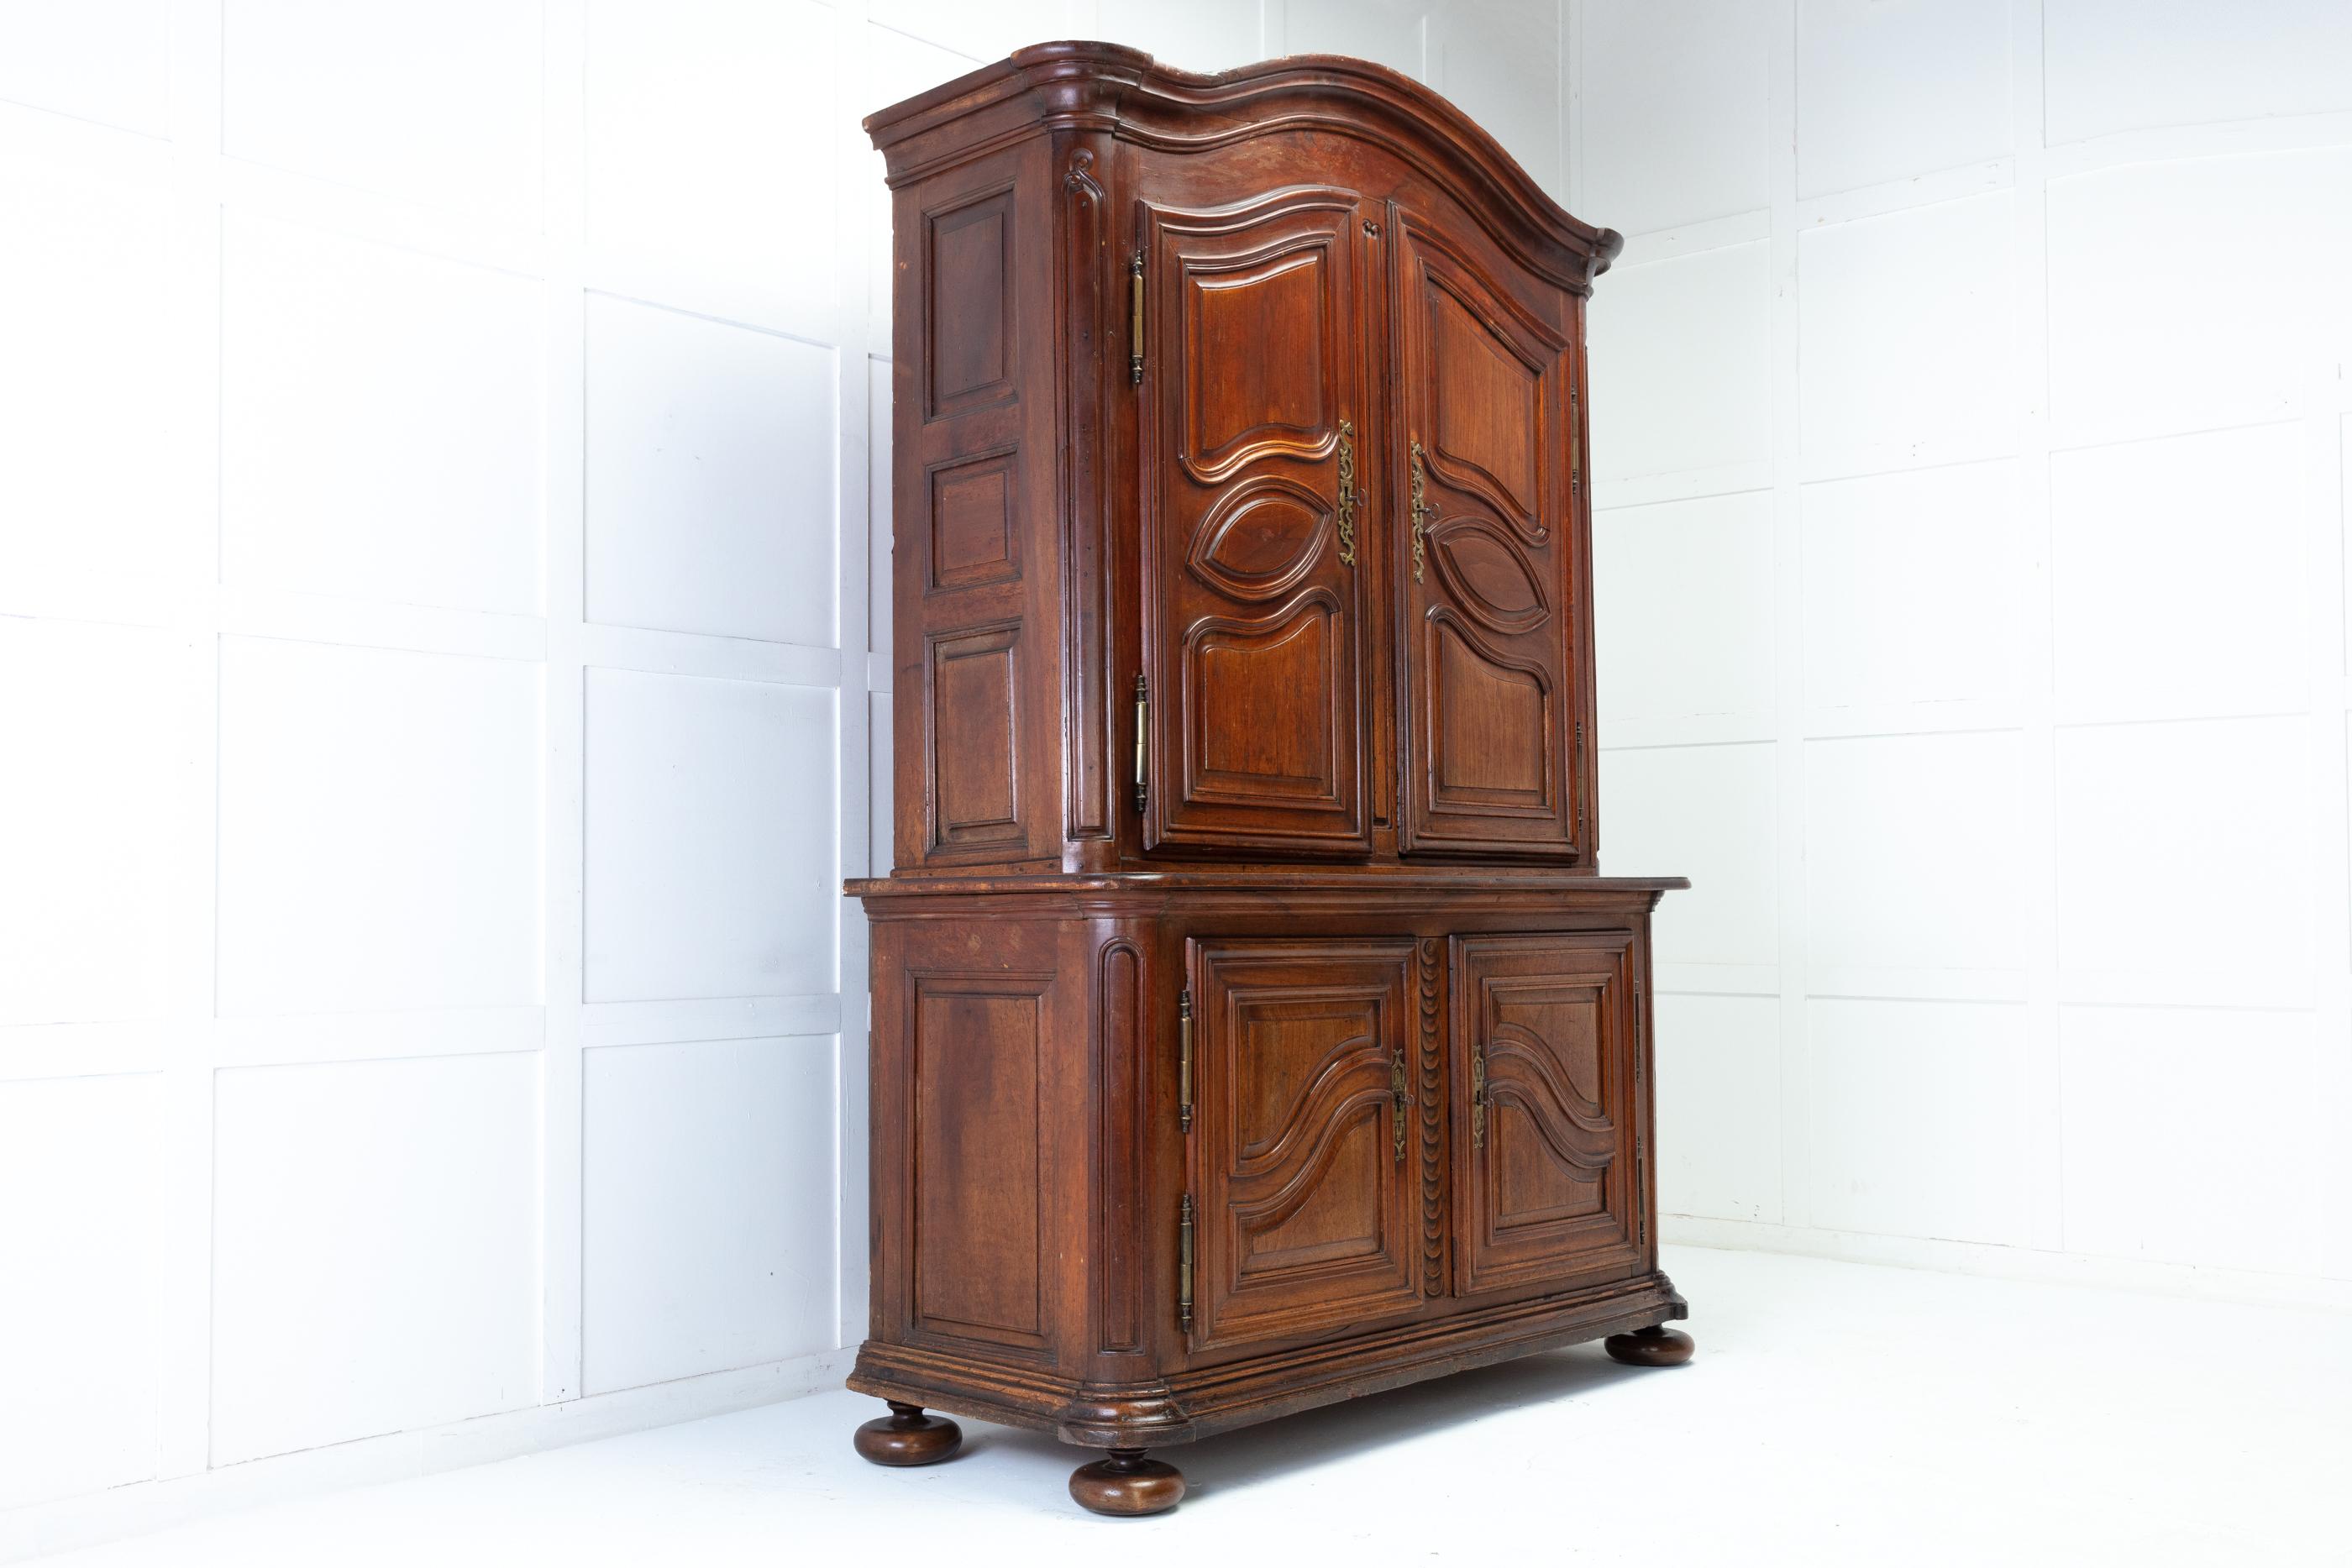 18th century walnut buffet deux corps. Having a deep moulded, arched cornice above a pair of panelled doors with faceted brass hinges that open to reveal two shelves on either side. The low waisted base has a further two panelled doors that reveal a